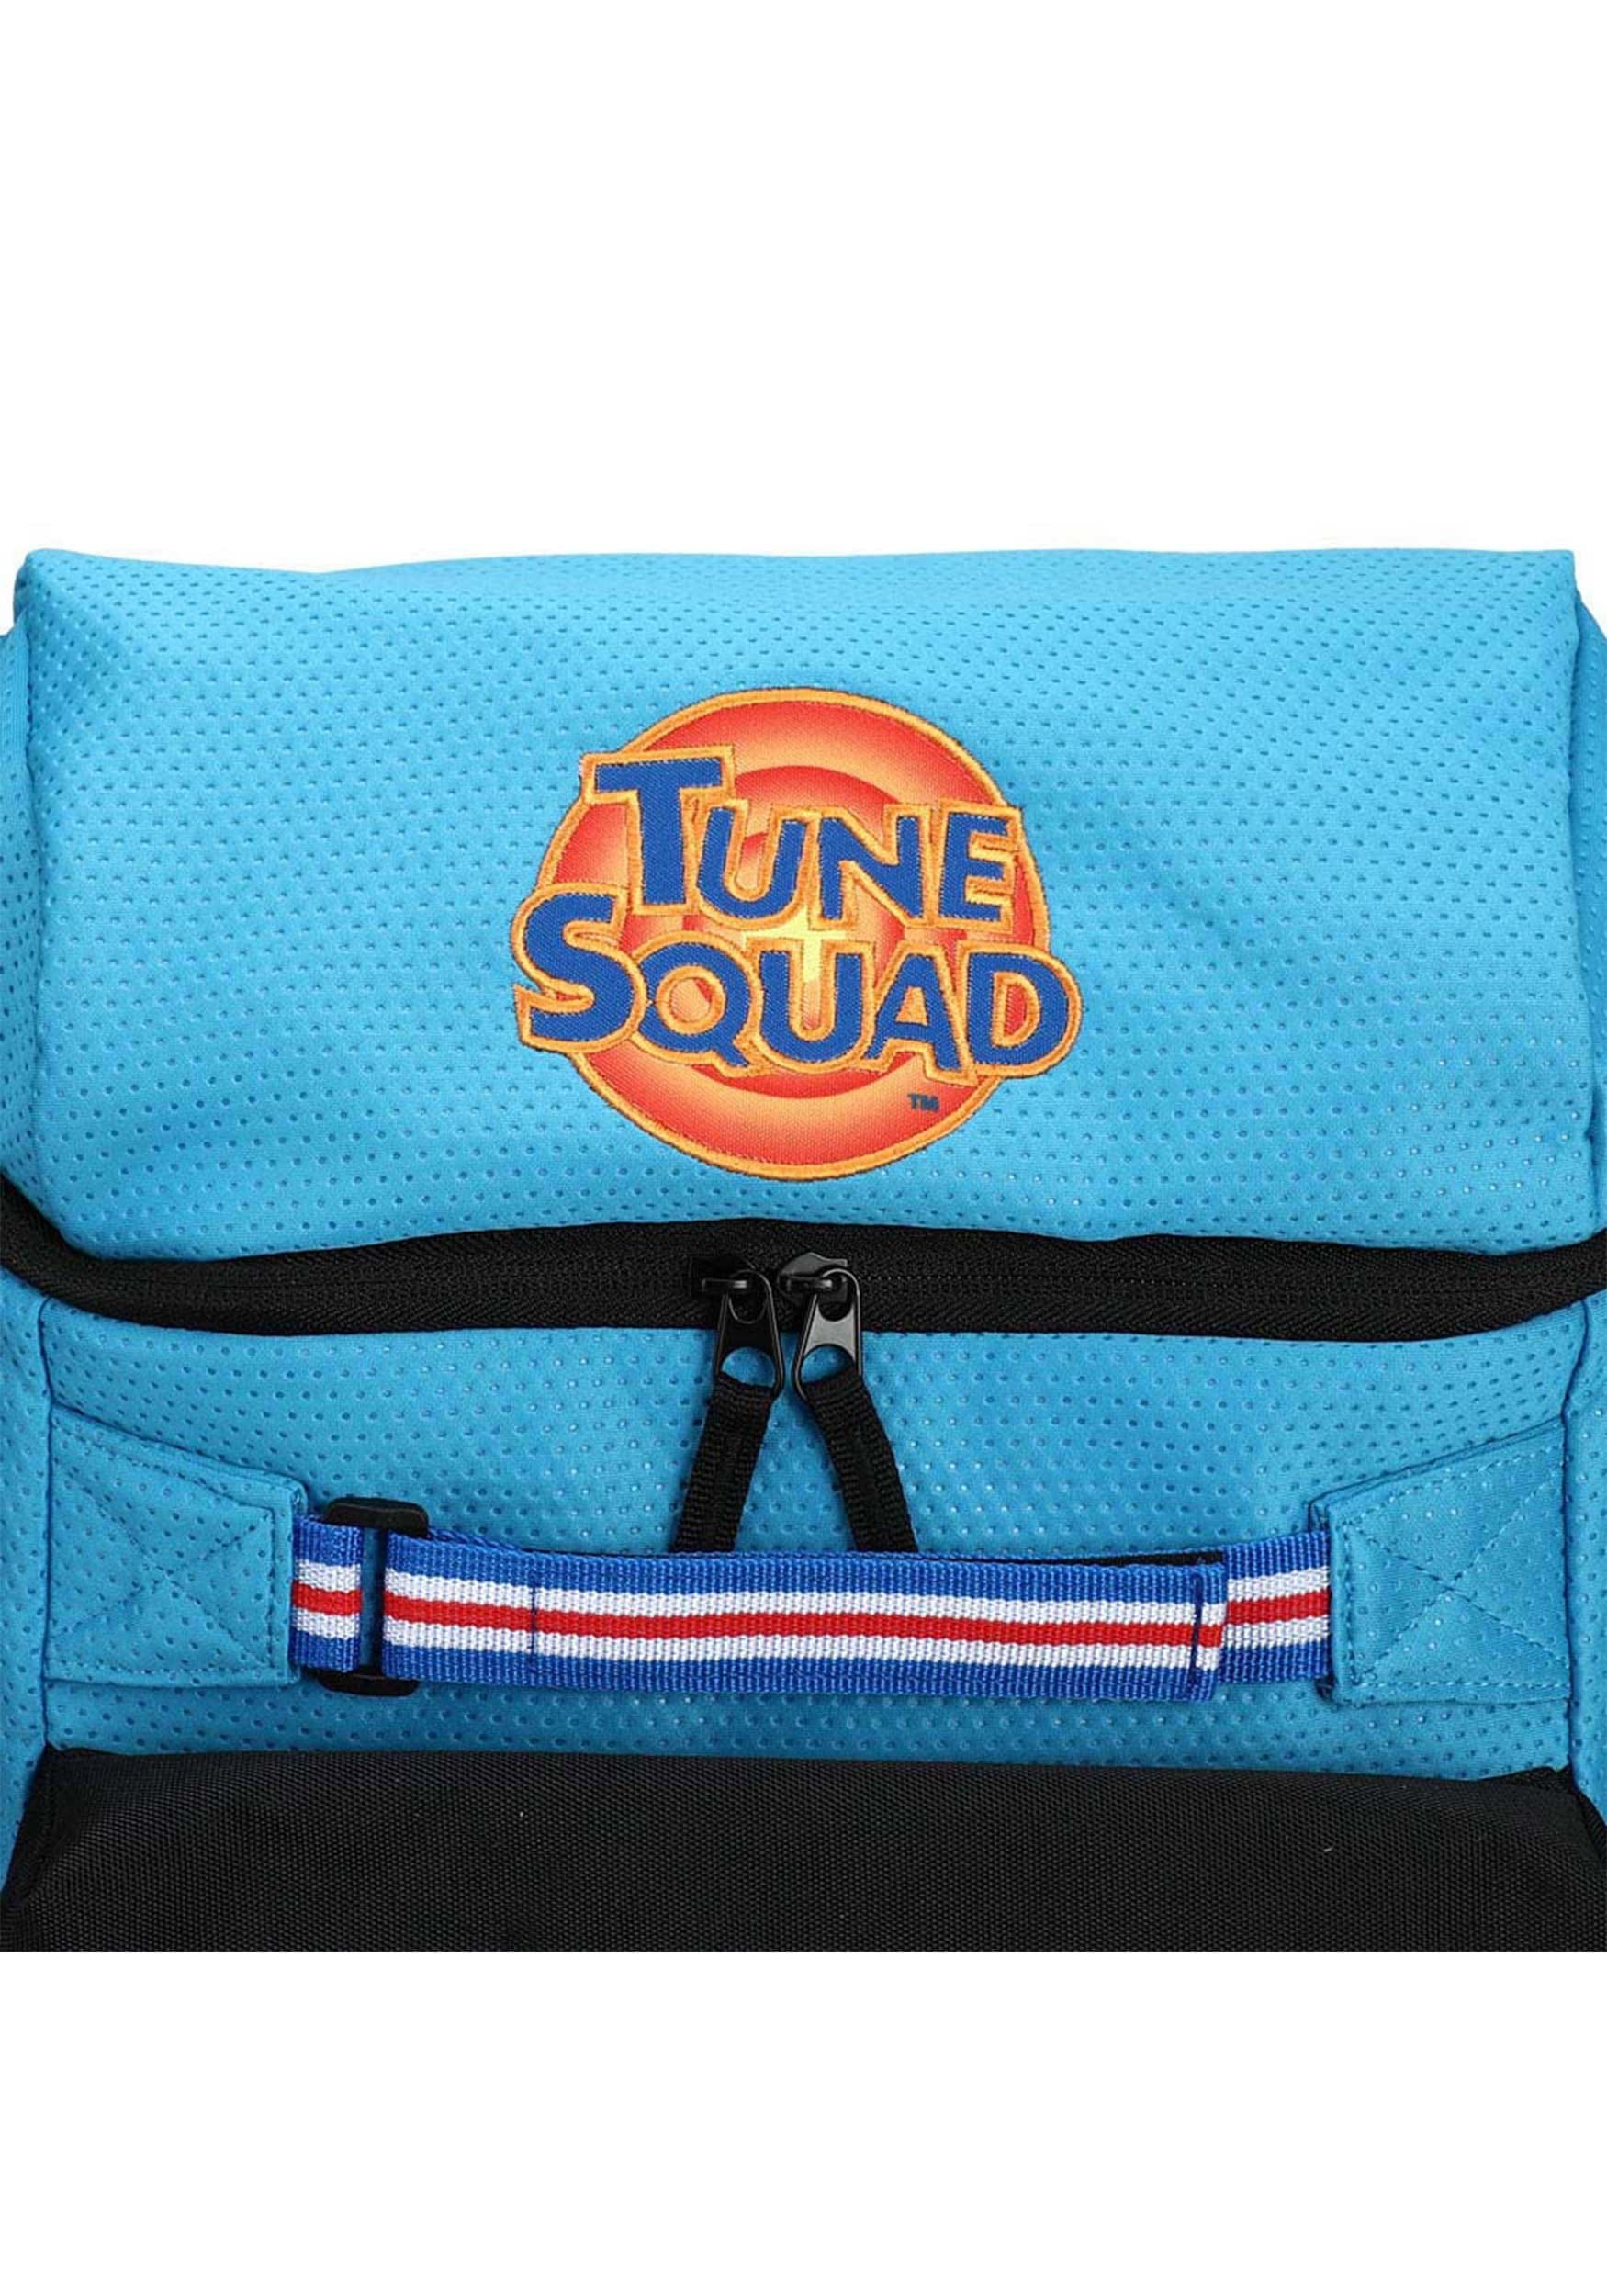 Backpack Of Space Jam's Tune Squad Jersey , Space Jam Gifts